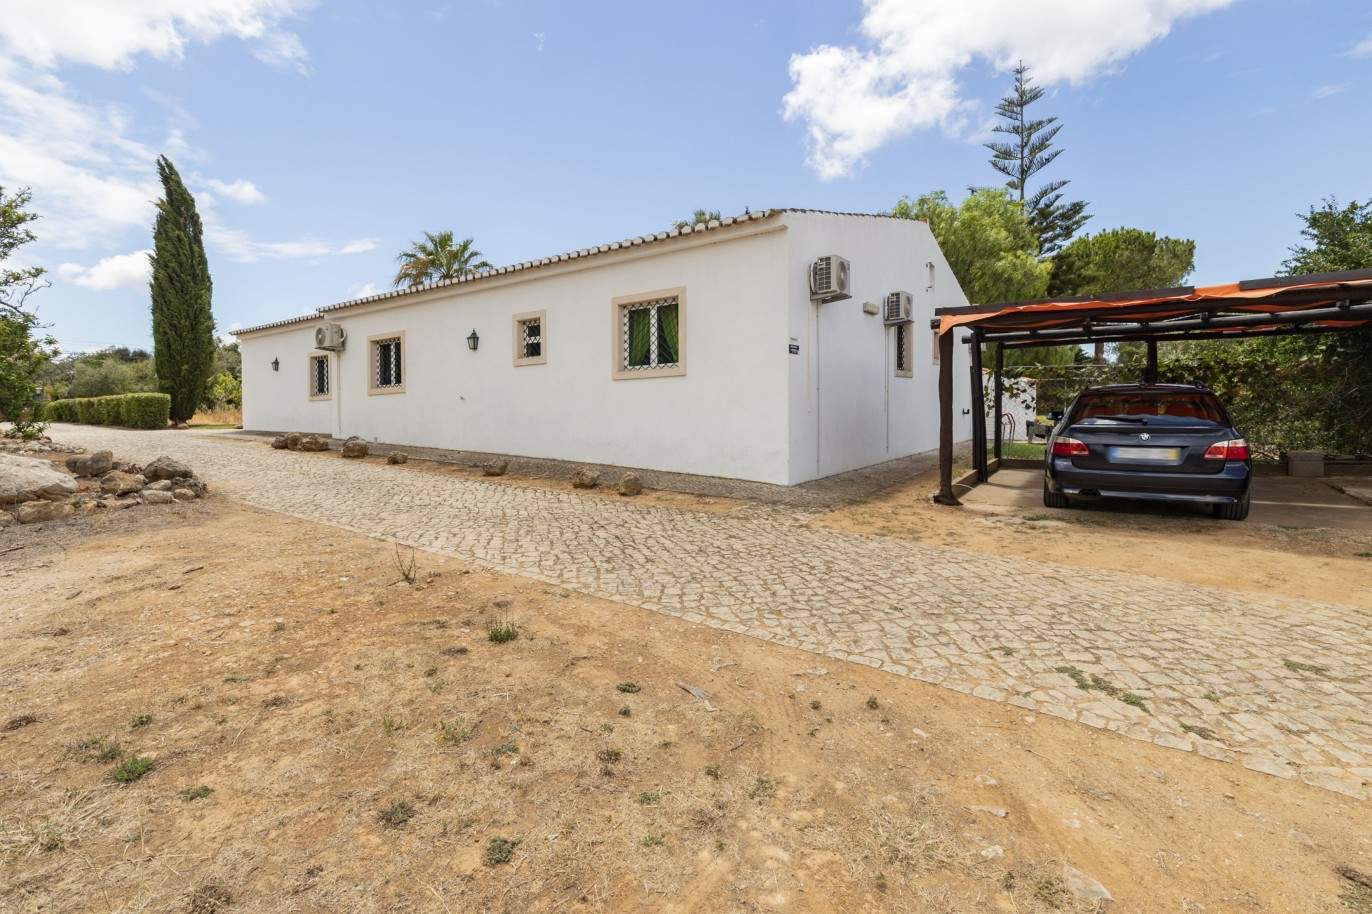 Rustic 5 bedrooms villa with pool and orchard, for sale in Pêra, Algarve_201836